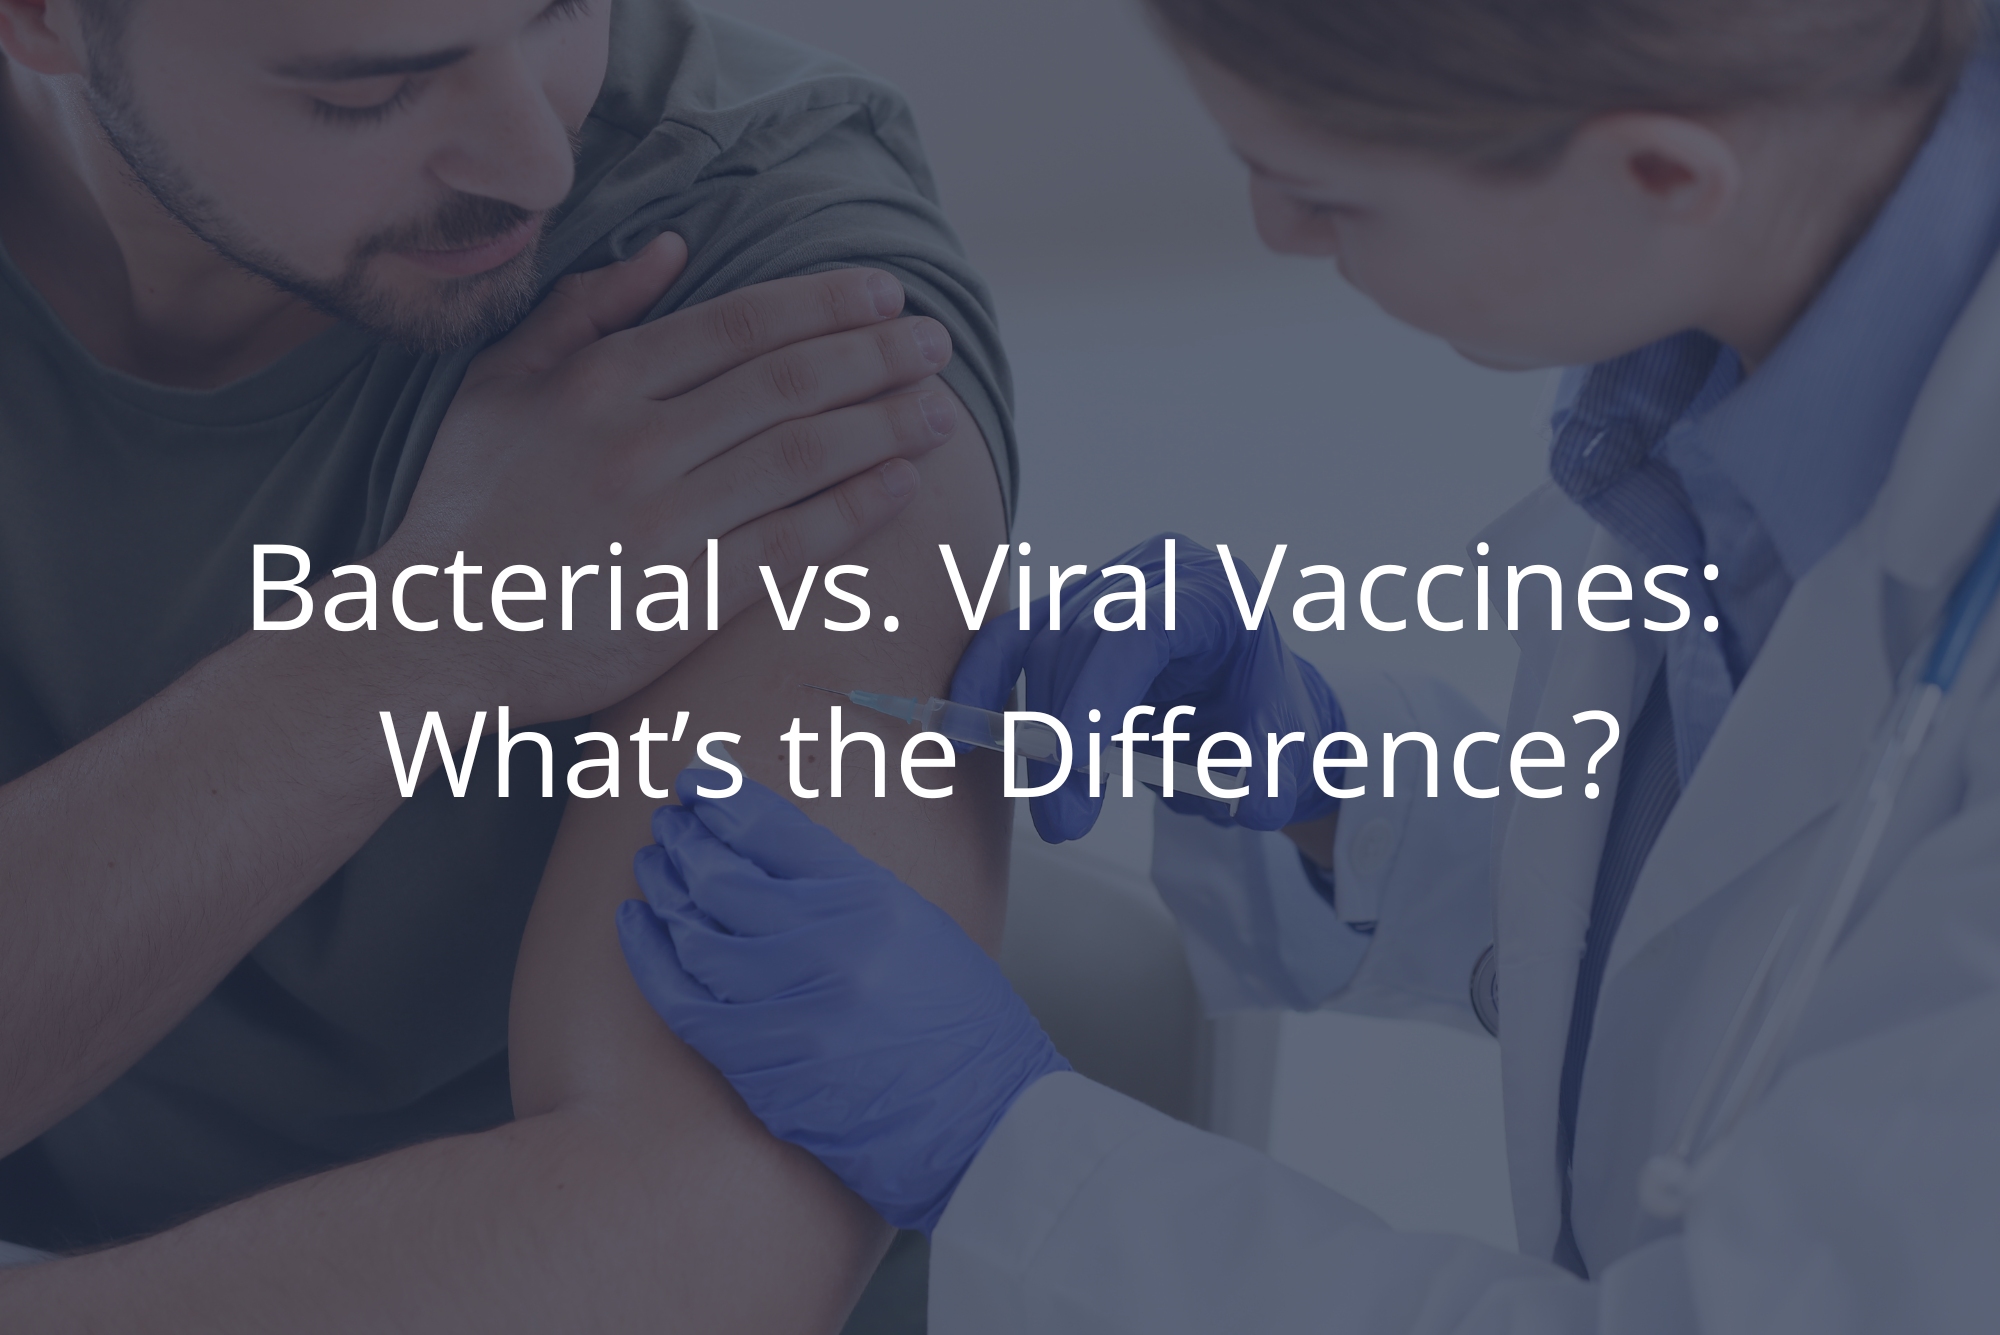 After learning the difference between bacterial vaccines vs. viral vaccines, a man in a green shirt receives a vaccine from his doctor with overlay.